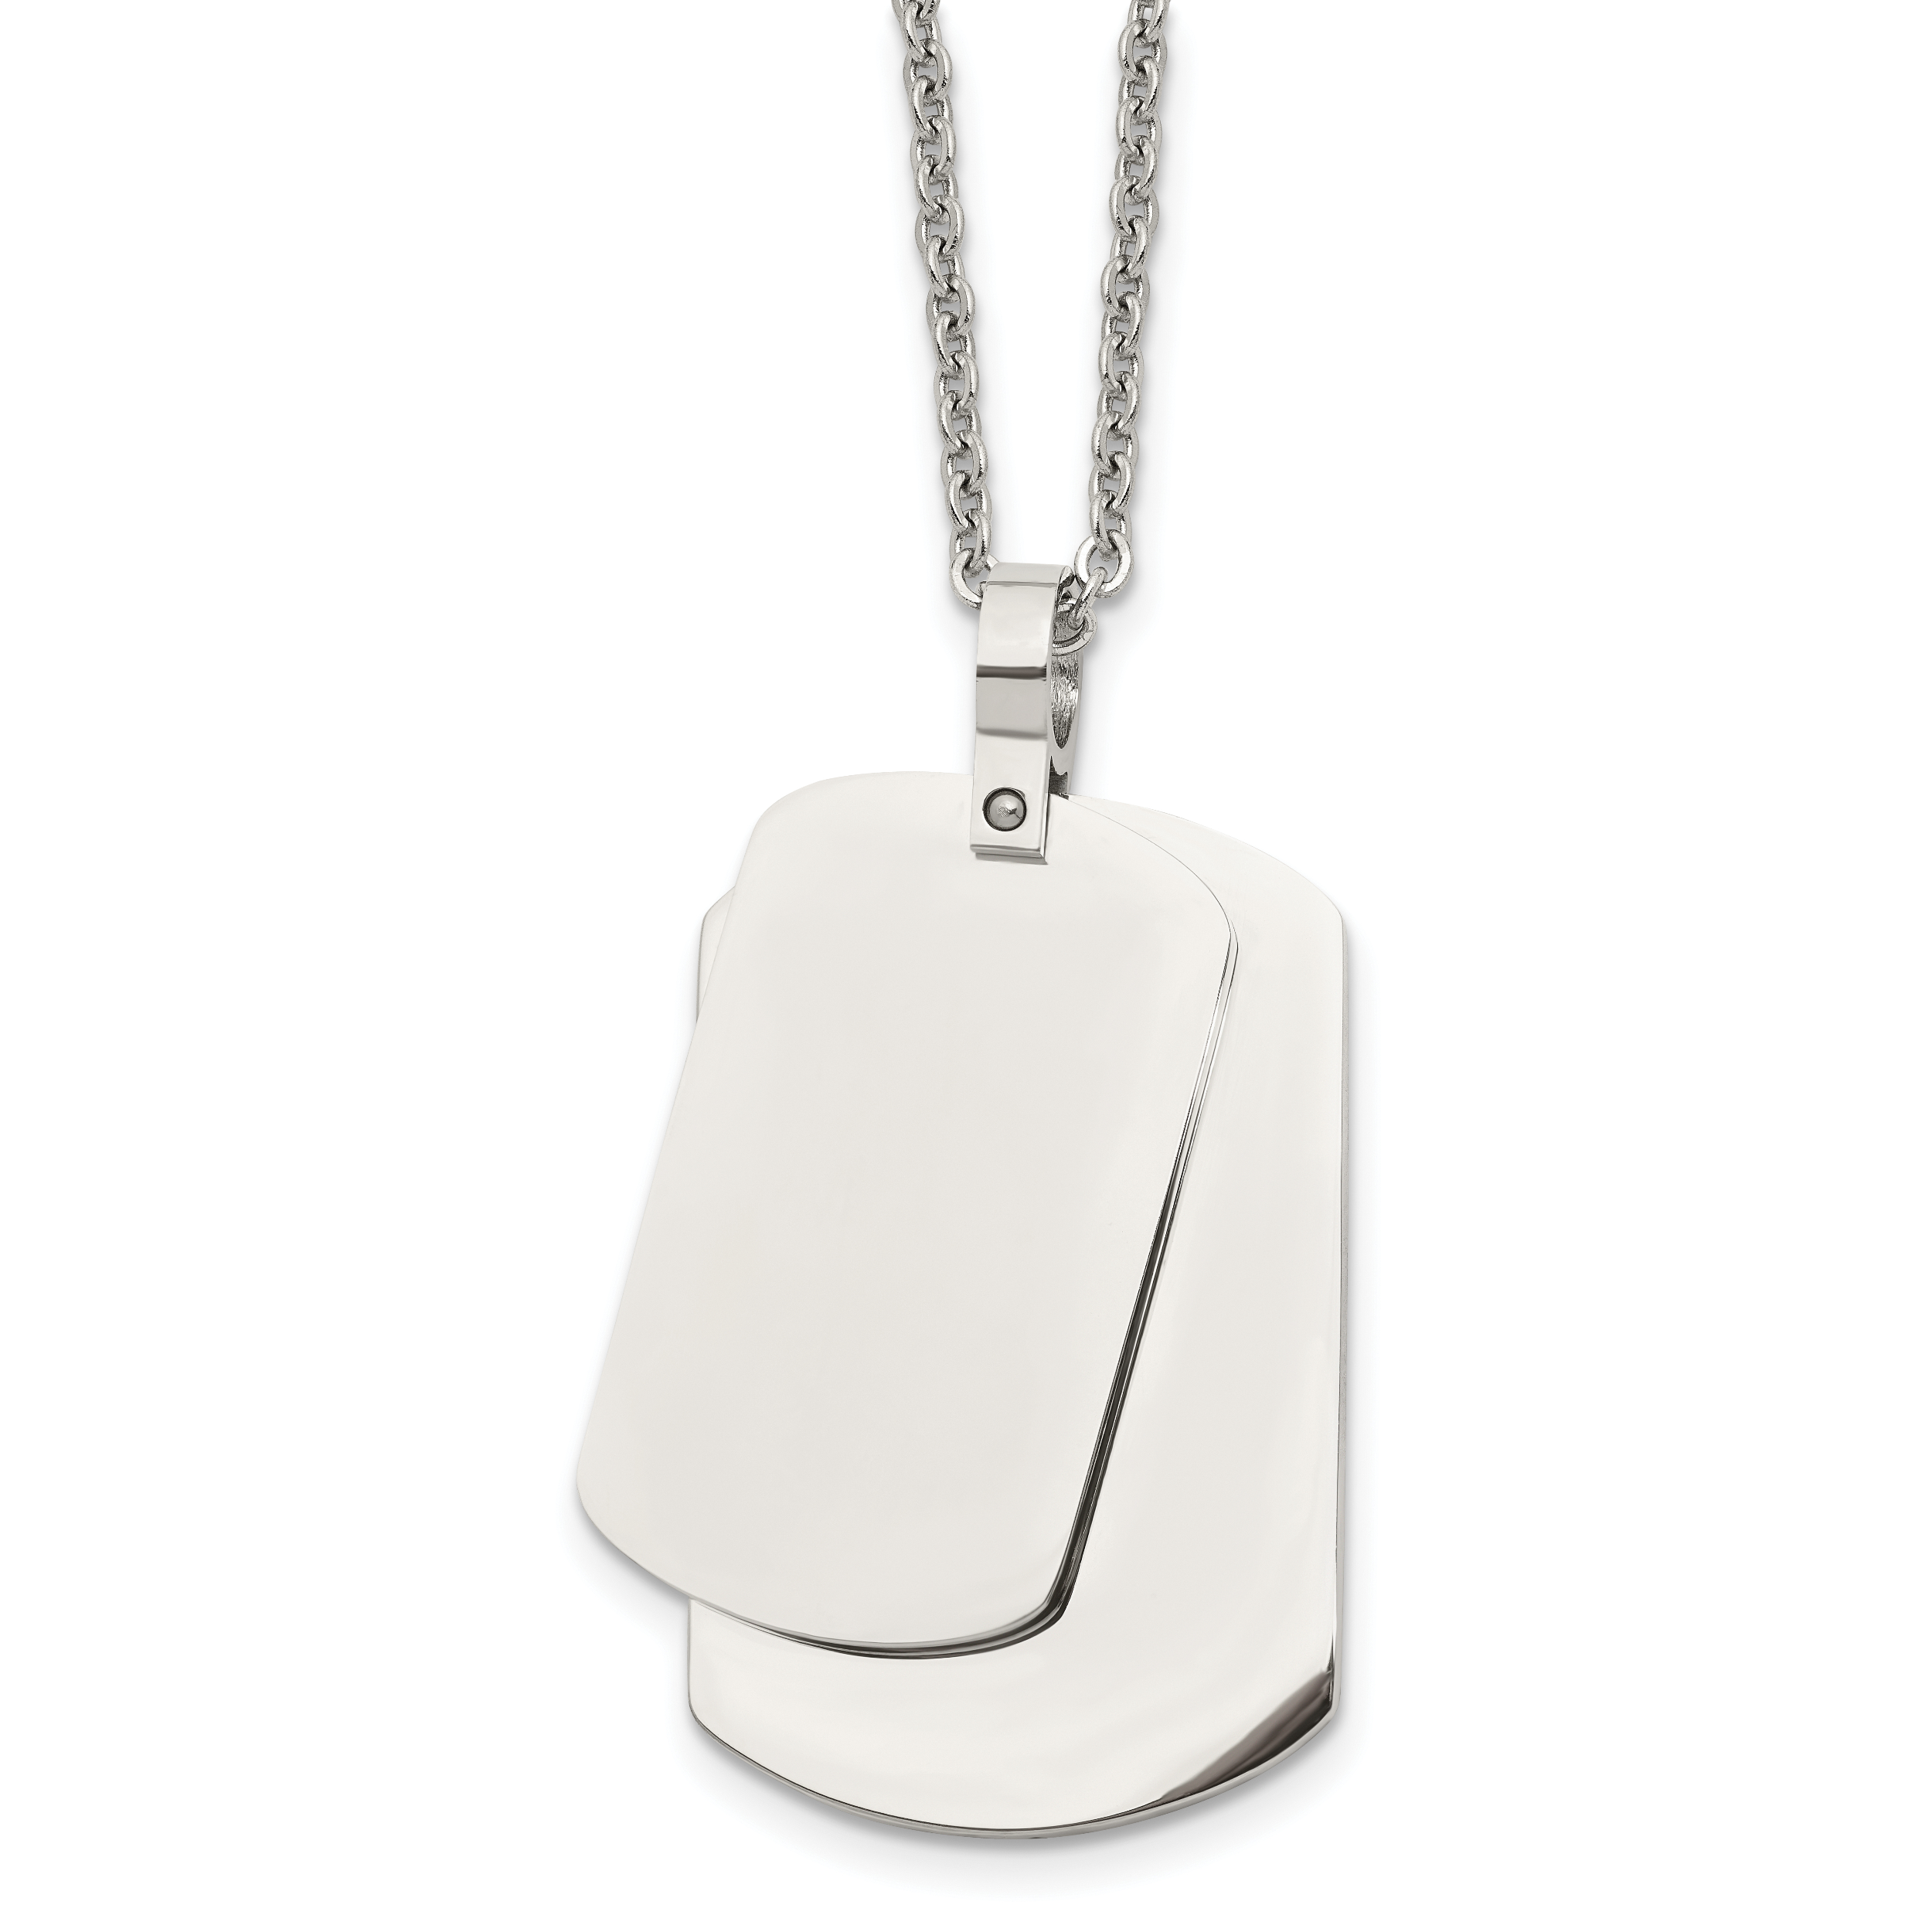 Stainless Steel Polished Double Dog Tag Necklace SRN1394 | eBay Stainless Steel Dog Tag Necklace